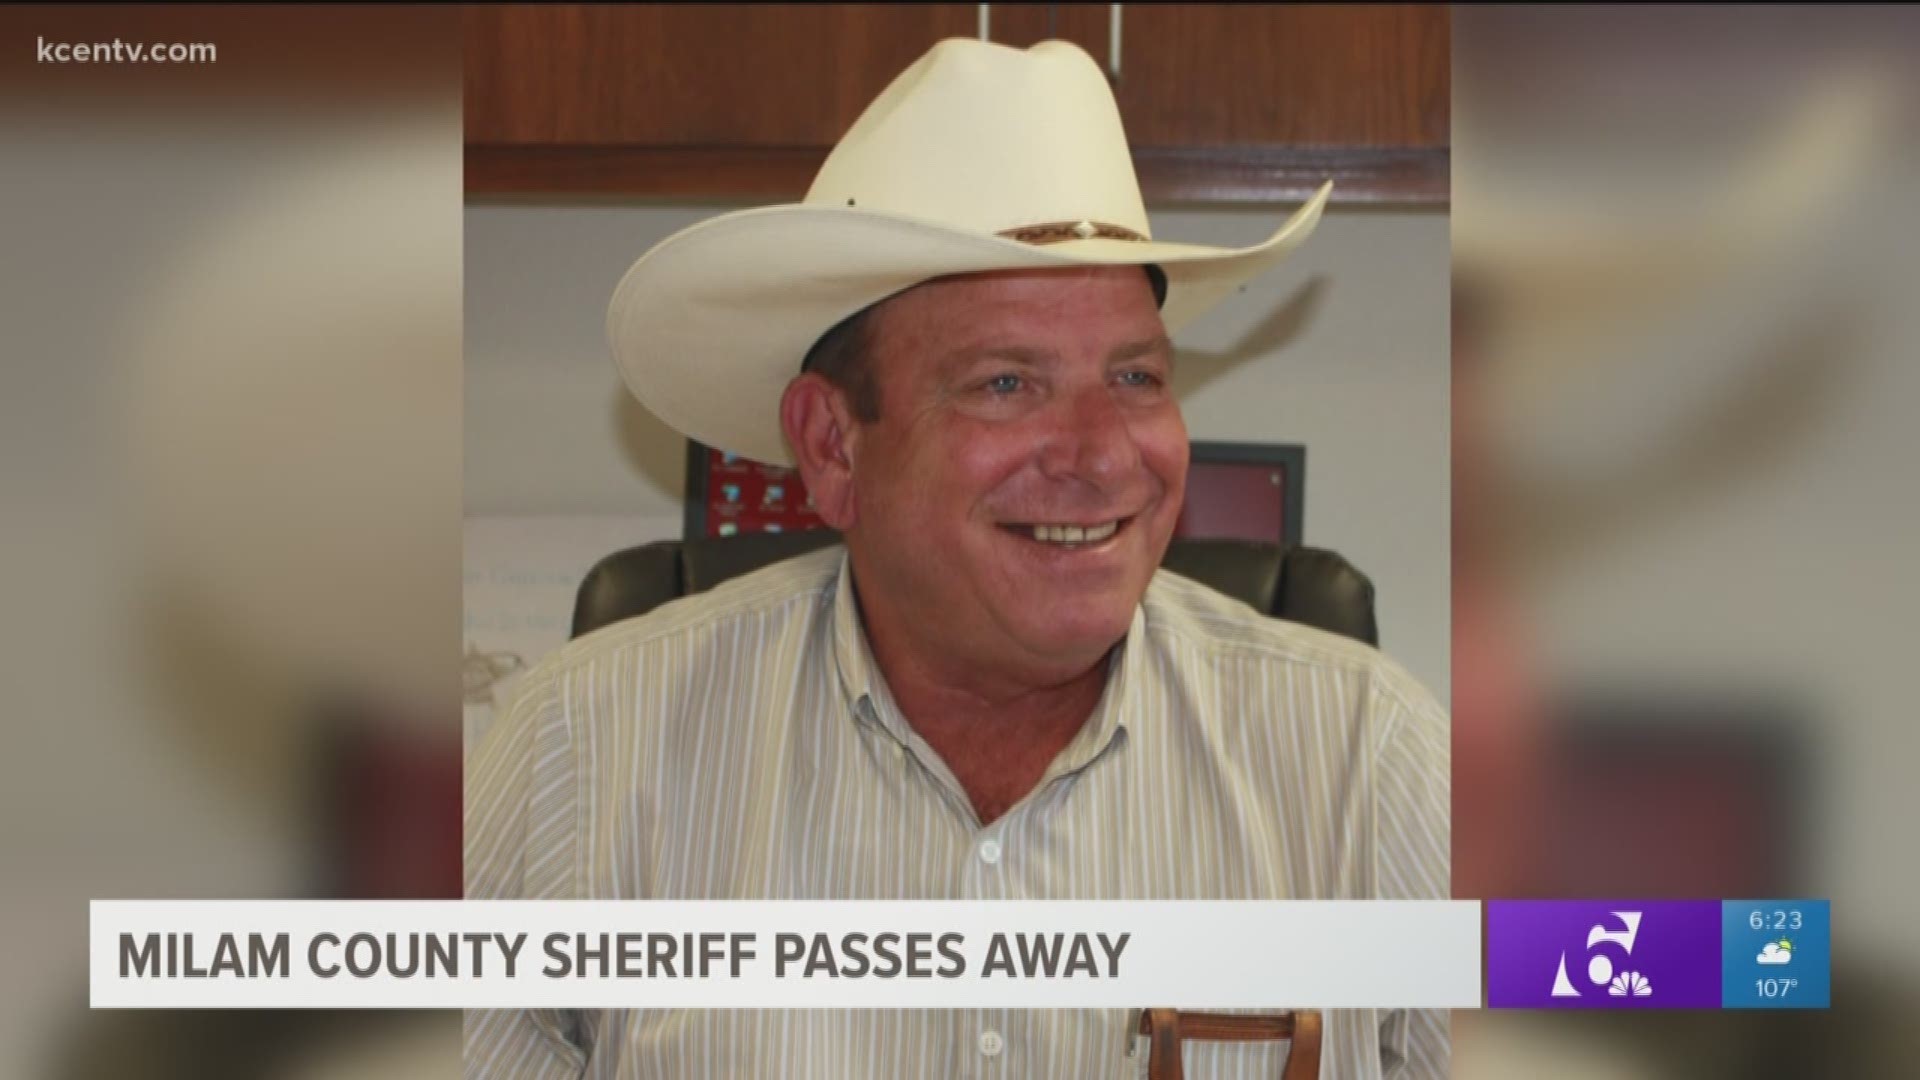 Sheriff David Greene was on vacation in Oregon when he suffered a heart attack.